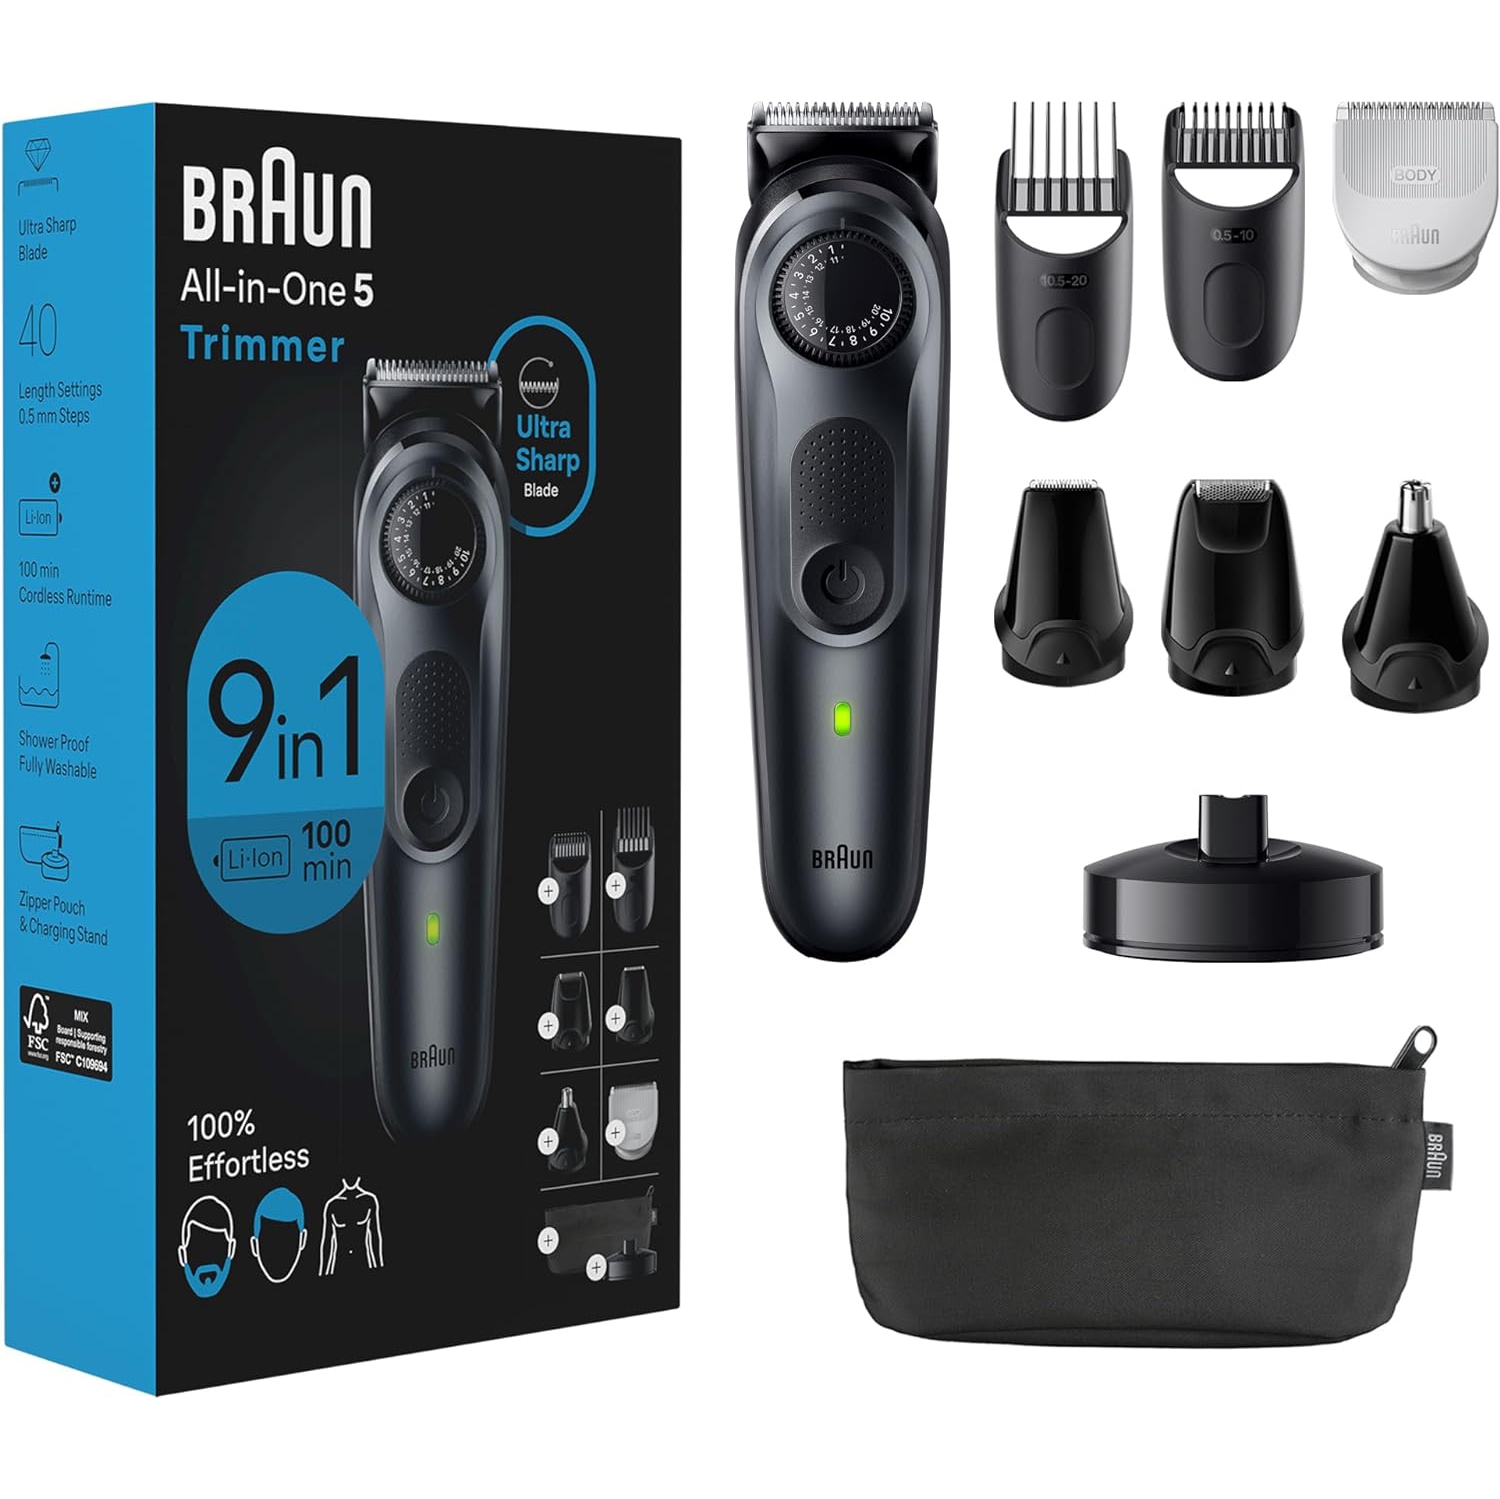 Braun All-in-One Style Kit Series 5 5490, 9-in-1 Trimmer for Men with Beard Trimmer, Body Trimmer for Manscaping, Hair Clippers & More, Ultra-Sharp Blade, 40 Length Settings